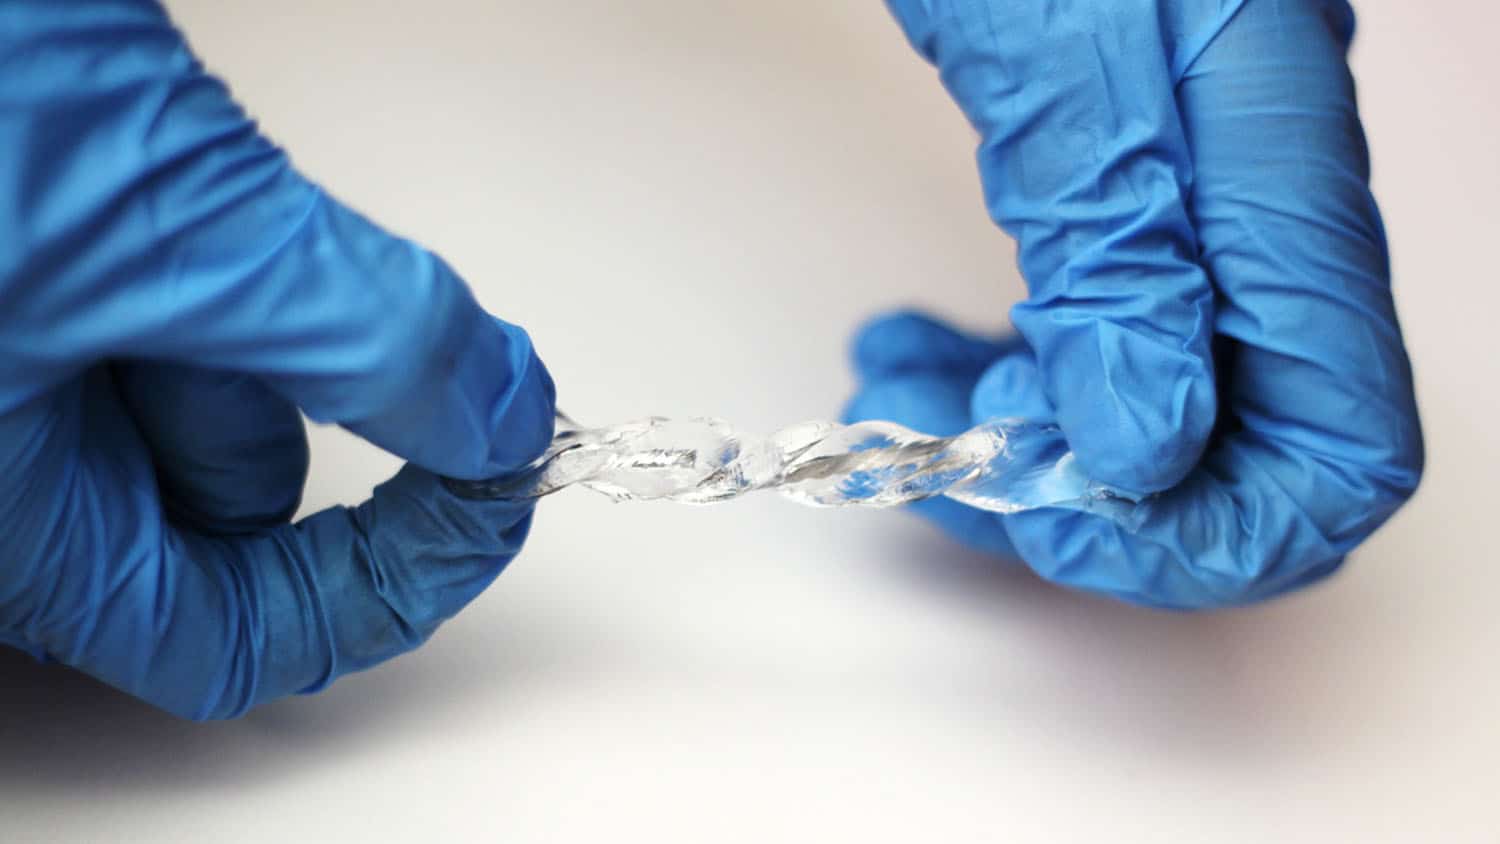 hands in latex gloves twist a piece of clear, elastic material that contains liquid metal